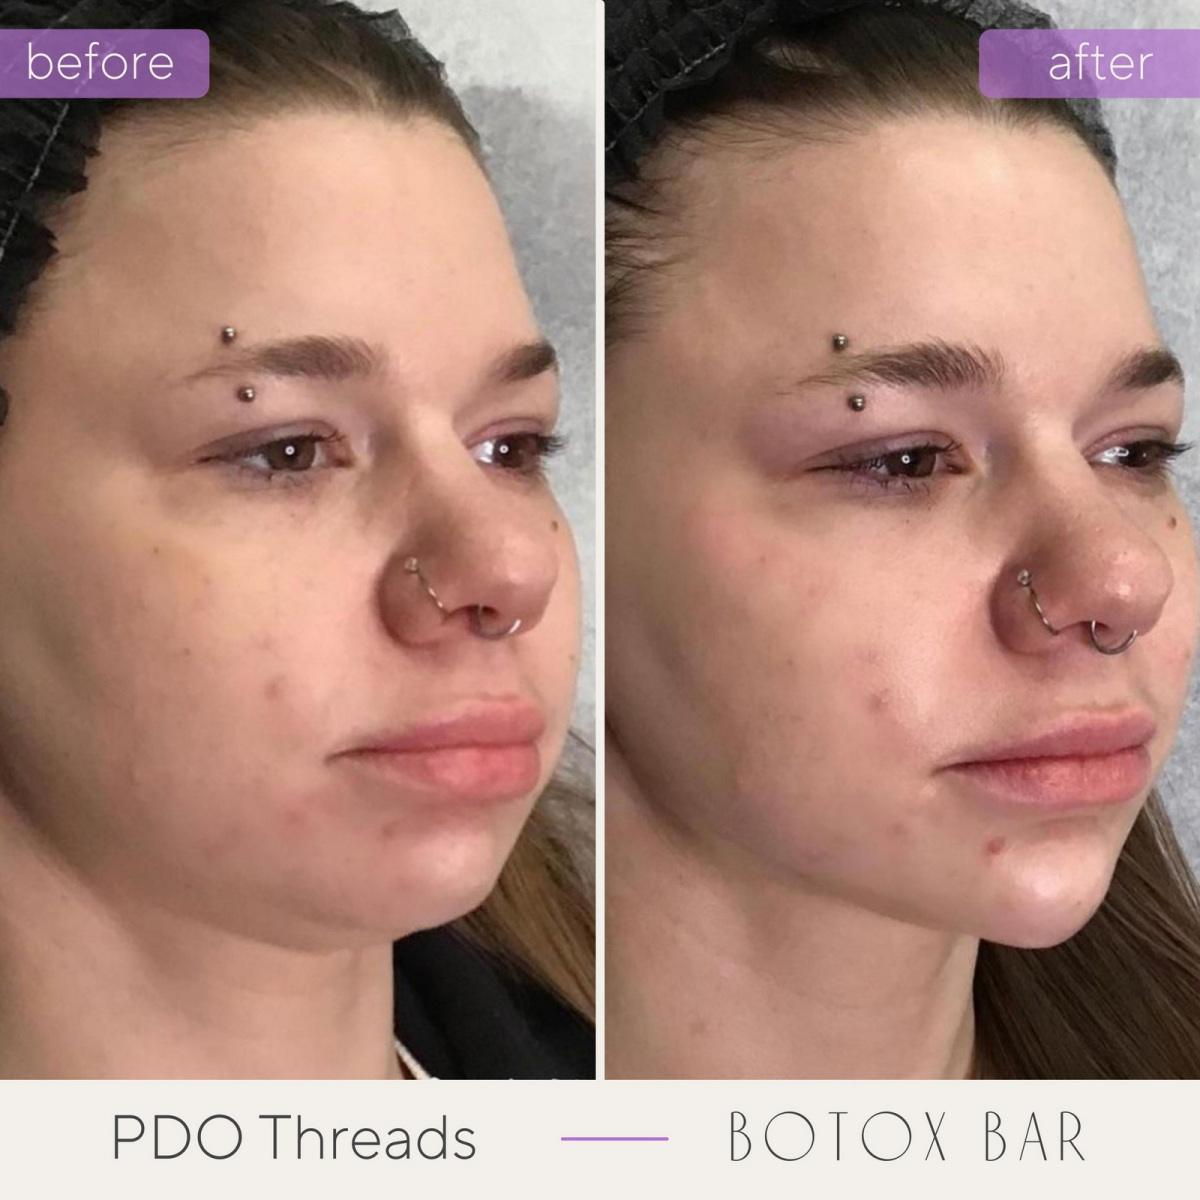 Before and After PDO Threads in The Botox Bar and Aesthetics at Dallas & Sherman, TX